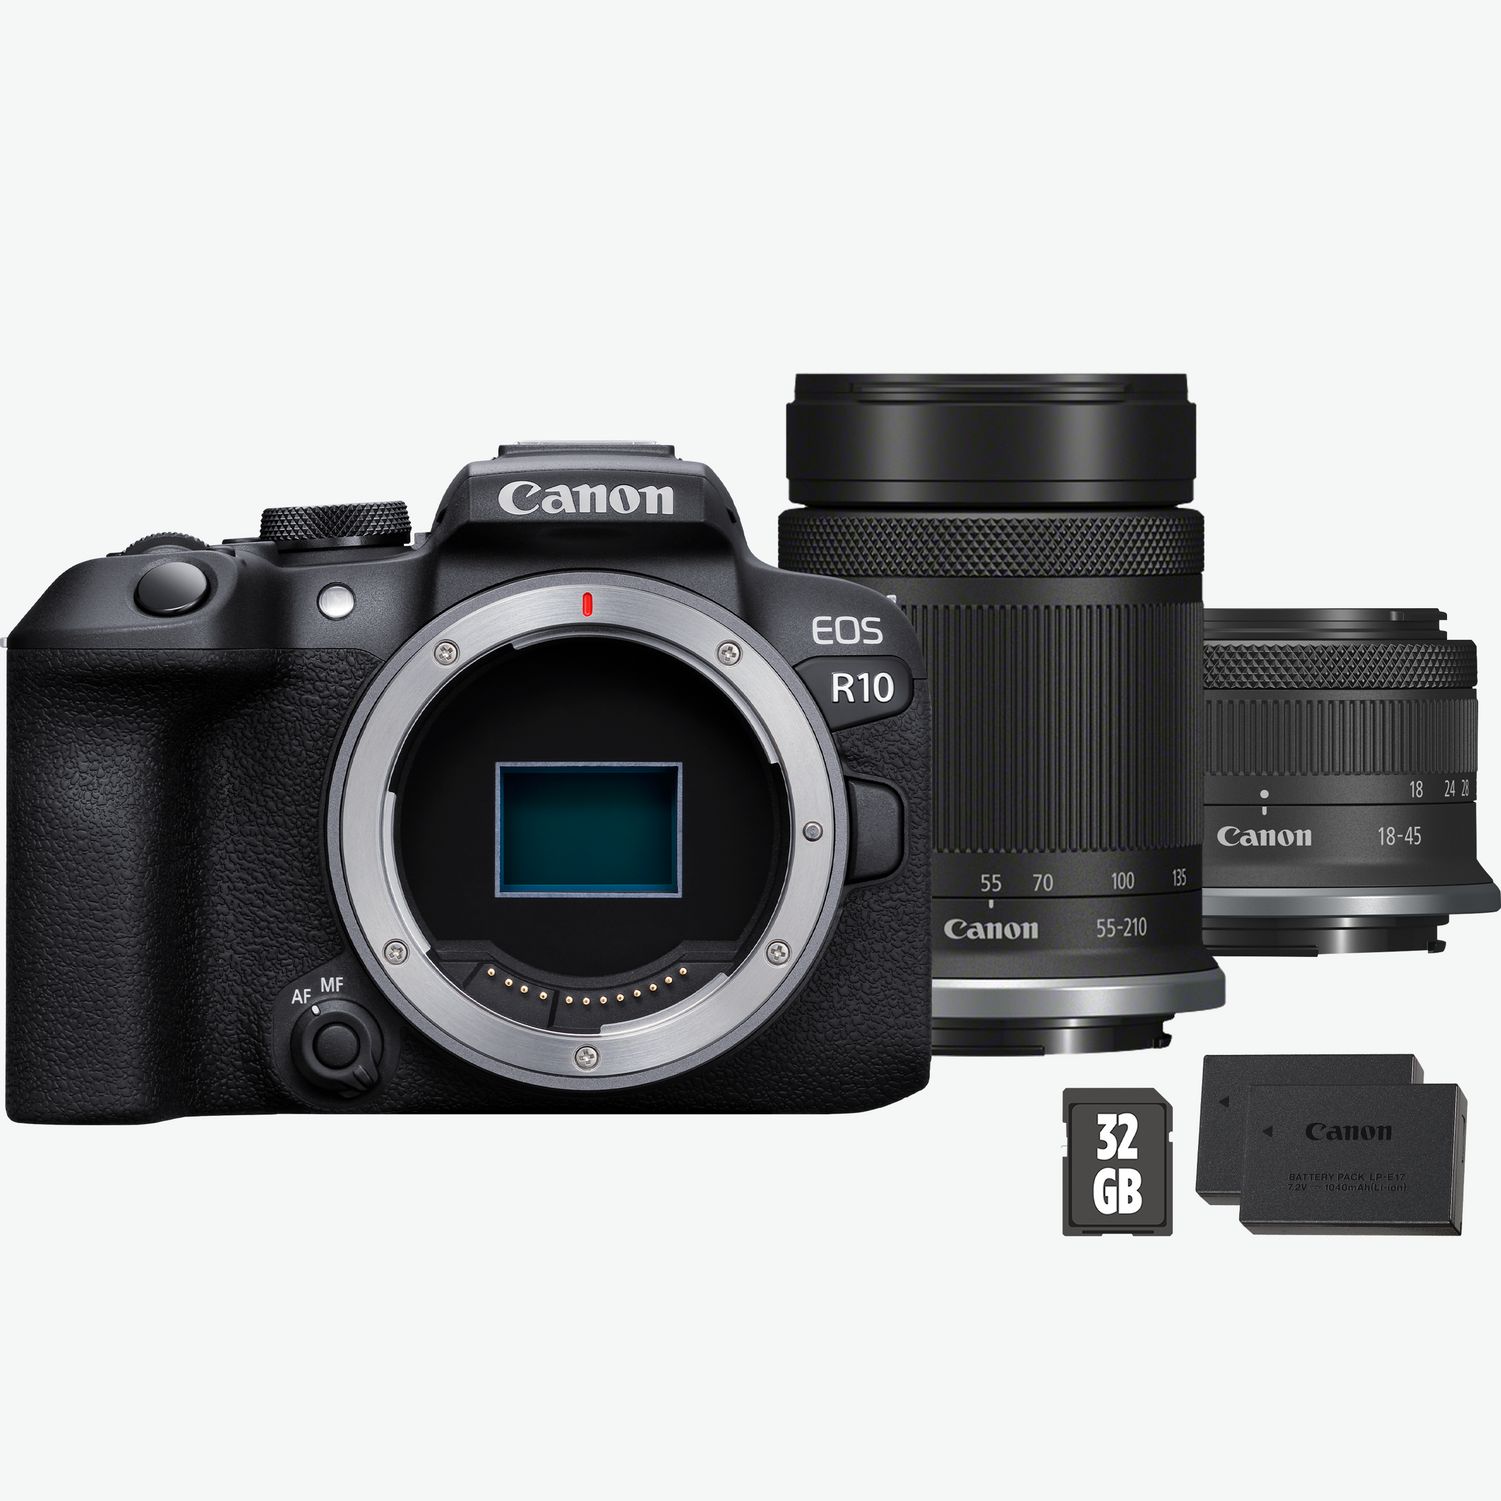 Buy Canon EOS M100 Canon — - Store Body Norge in Black Discontinued